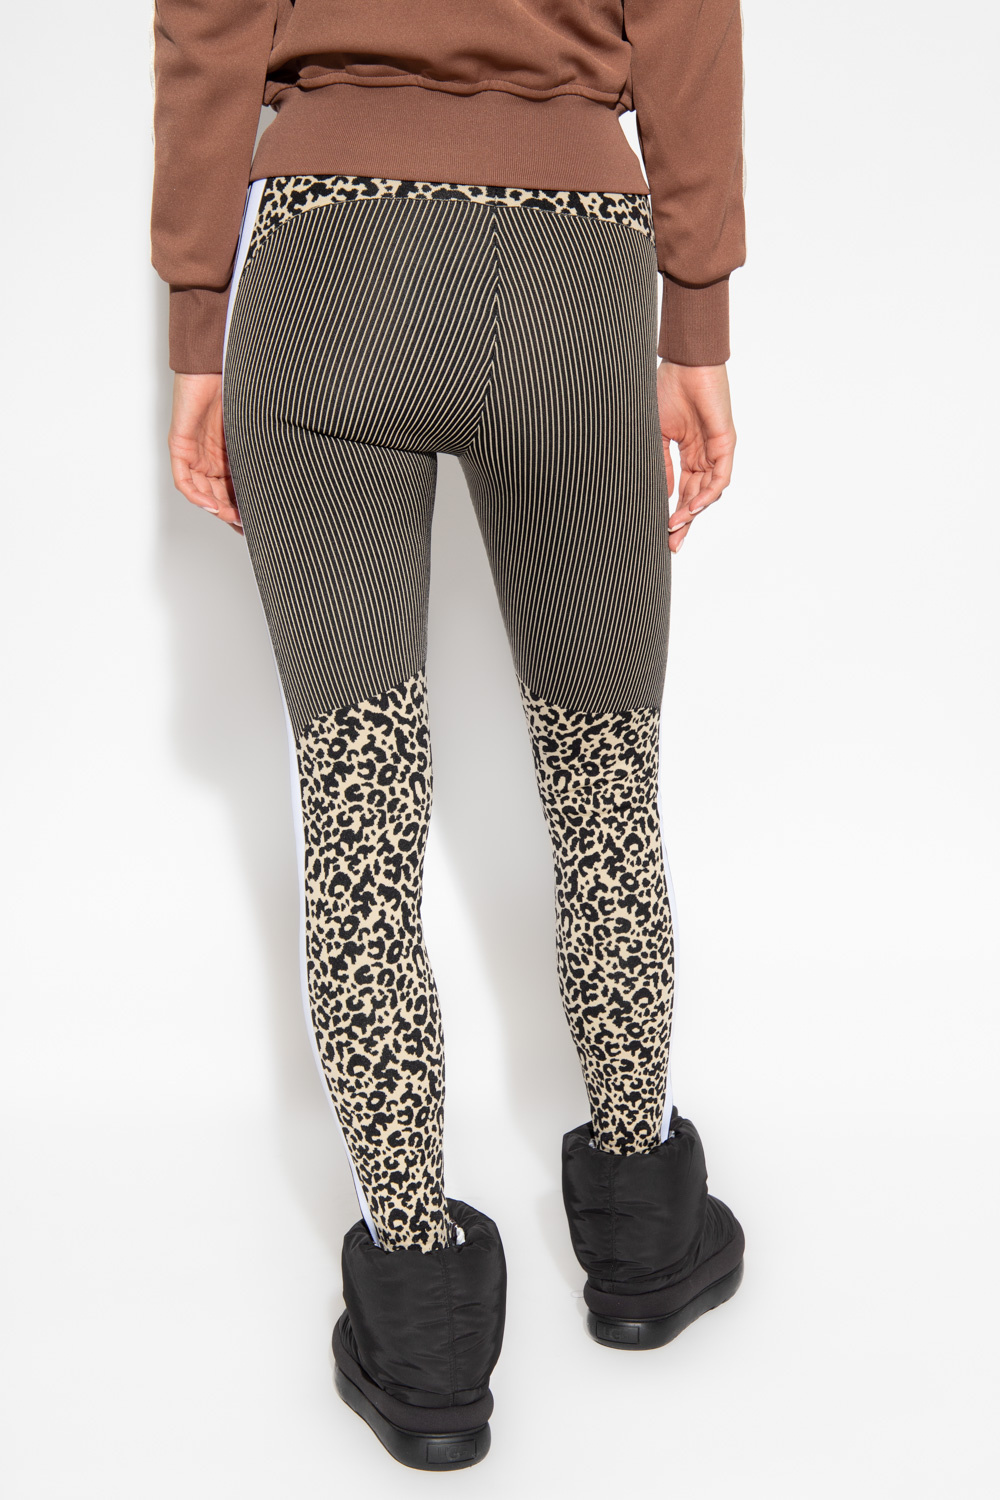 Palm Angels Leggings with animal motif, Women's Clothing